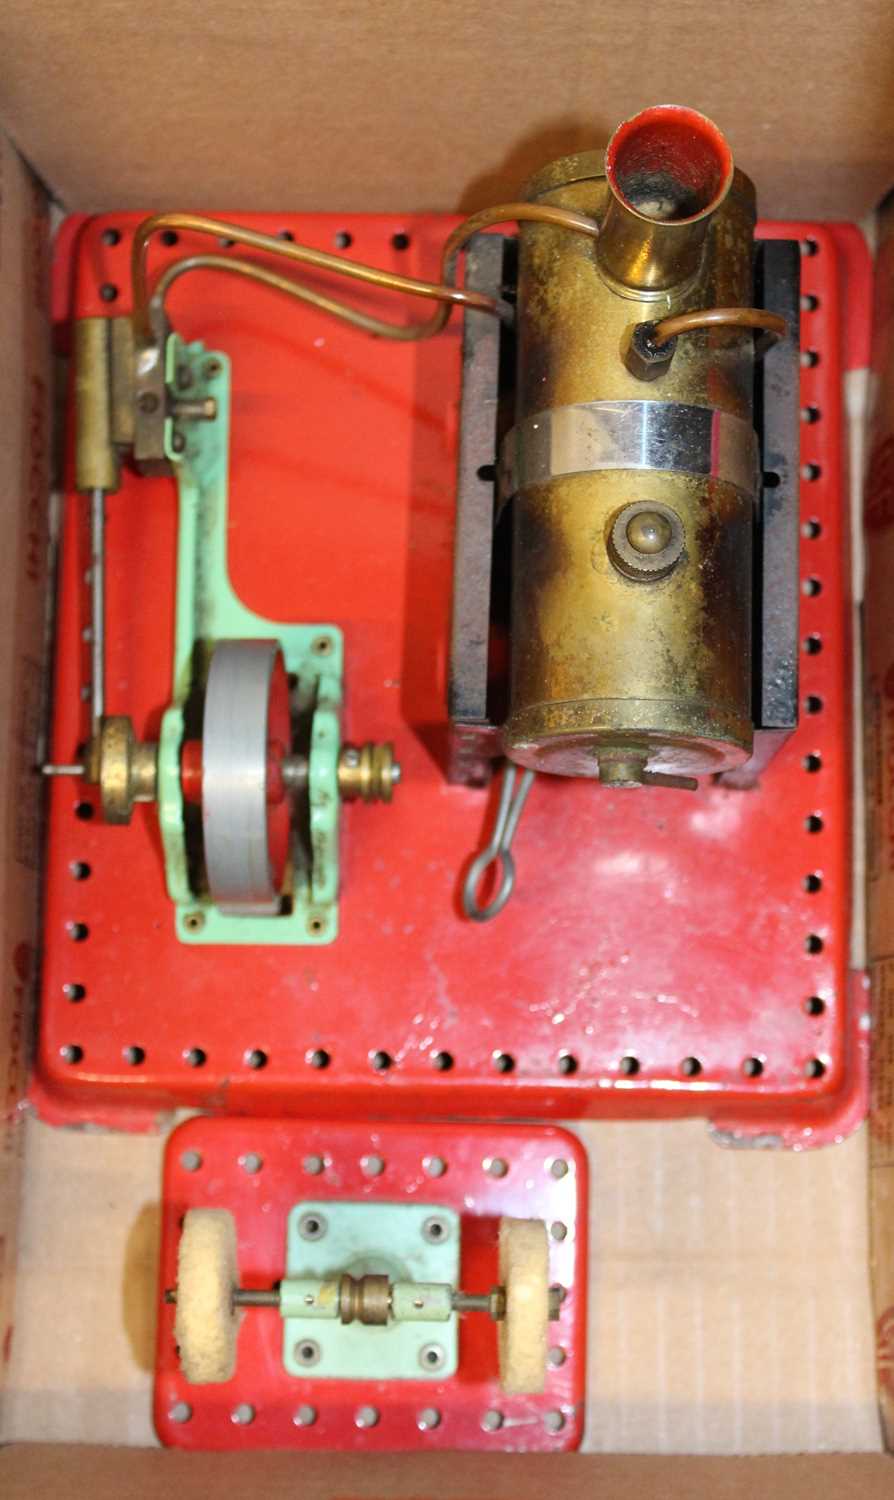 A Mamod stationery steam plant with a lineshaft polishing accessory